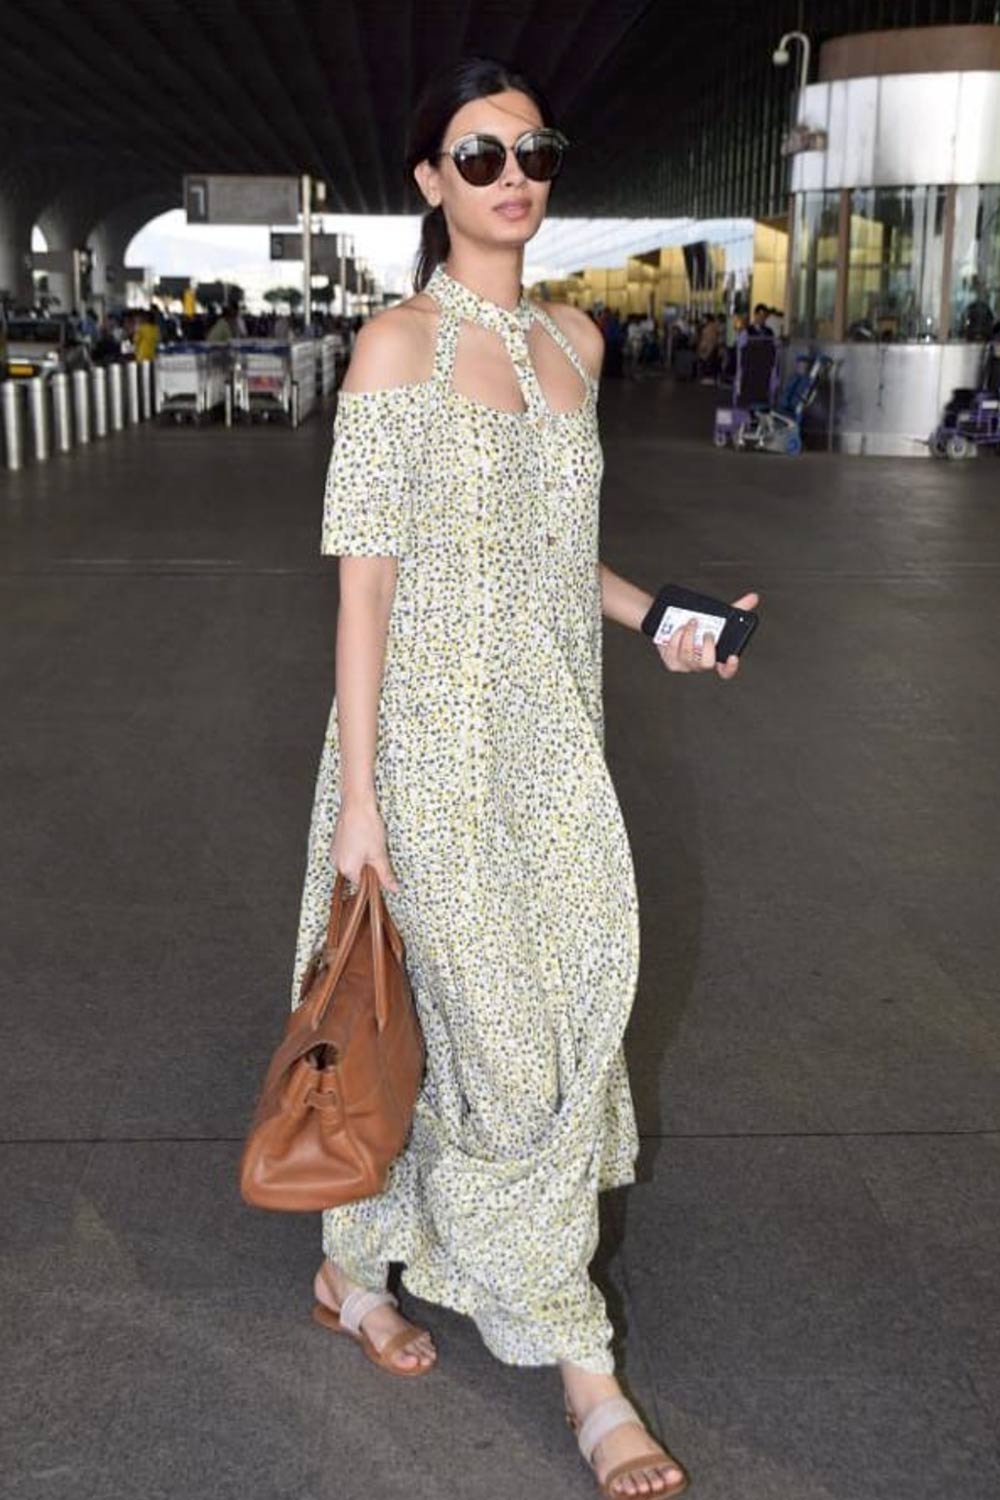 Block Printed Double Cowl Dress as seen on Diana Penty